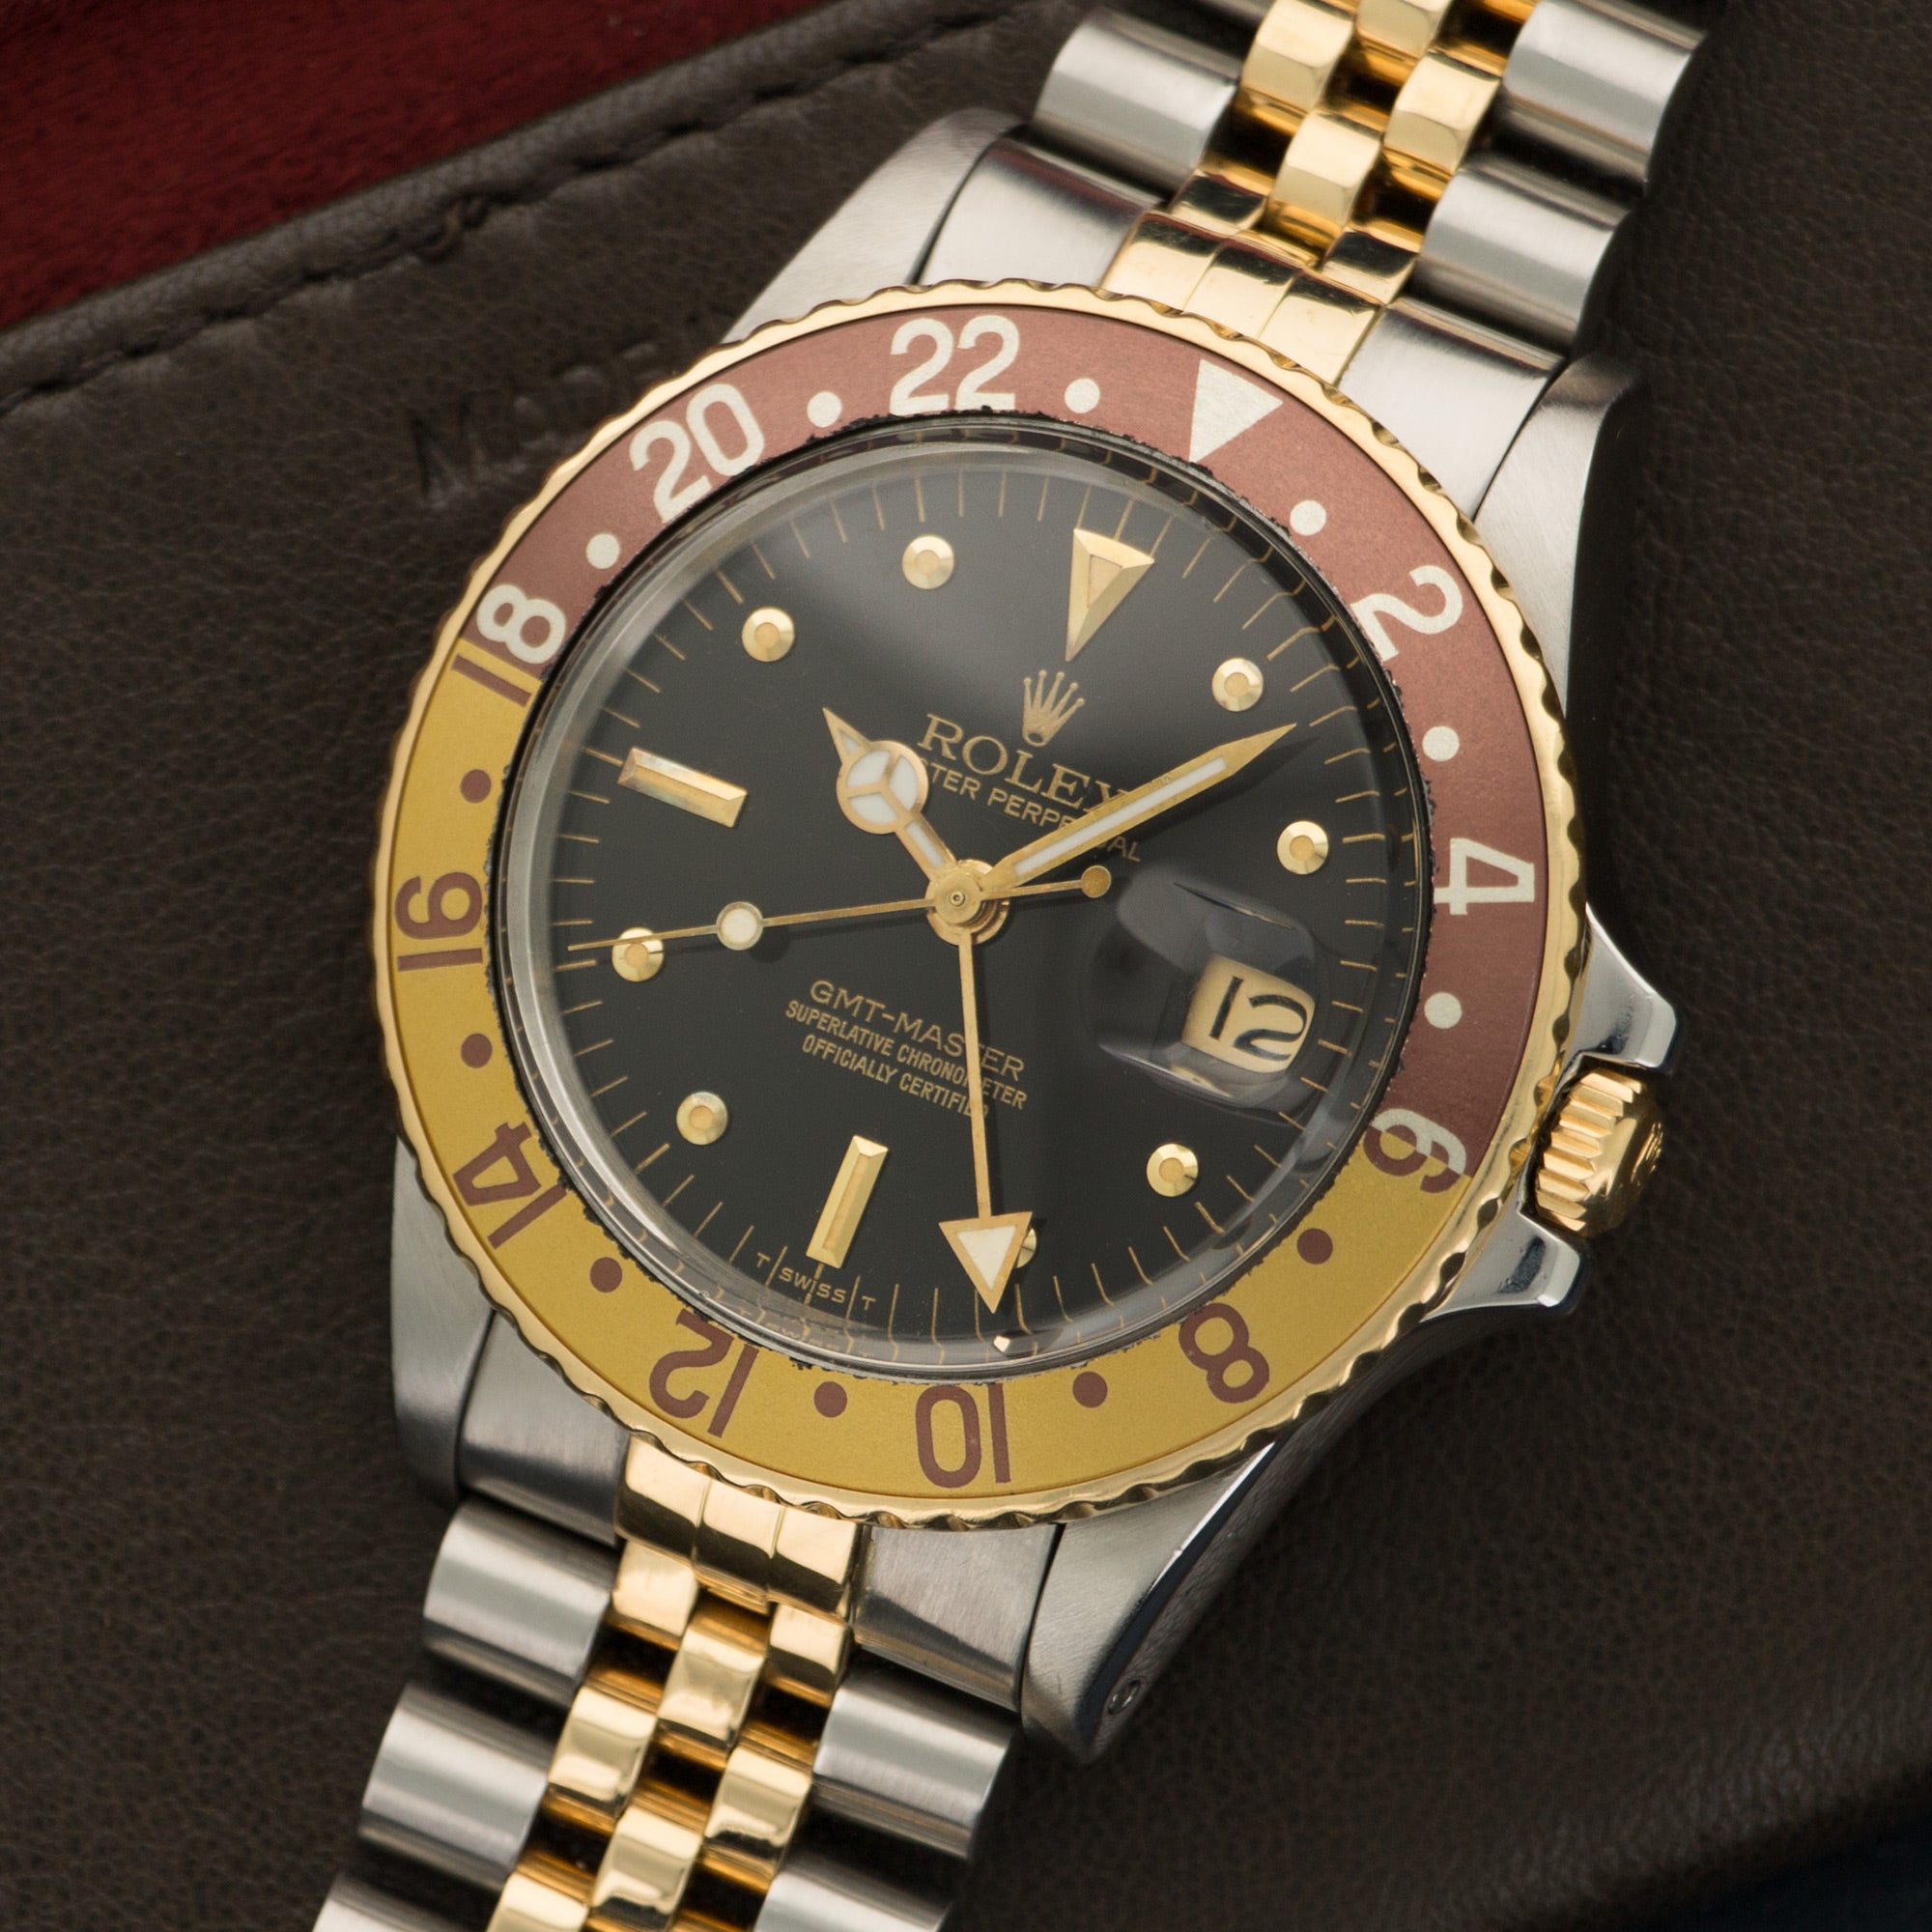 Rolex - Rolex Two-Tone GMT-Master Root Beer Watch Ref. 16753 - The Keystone Watches